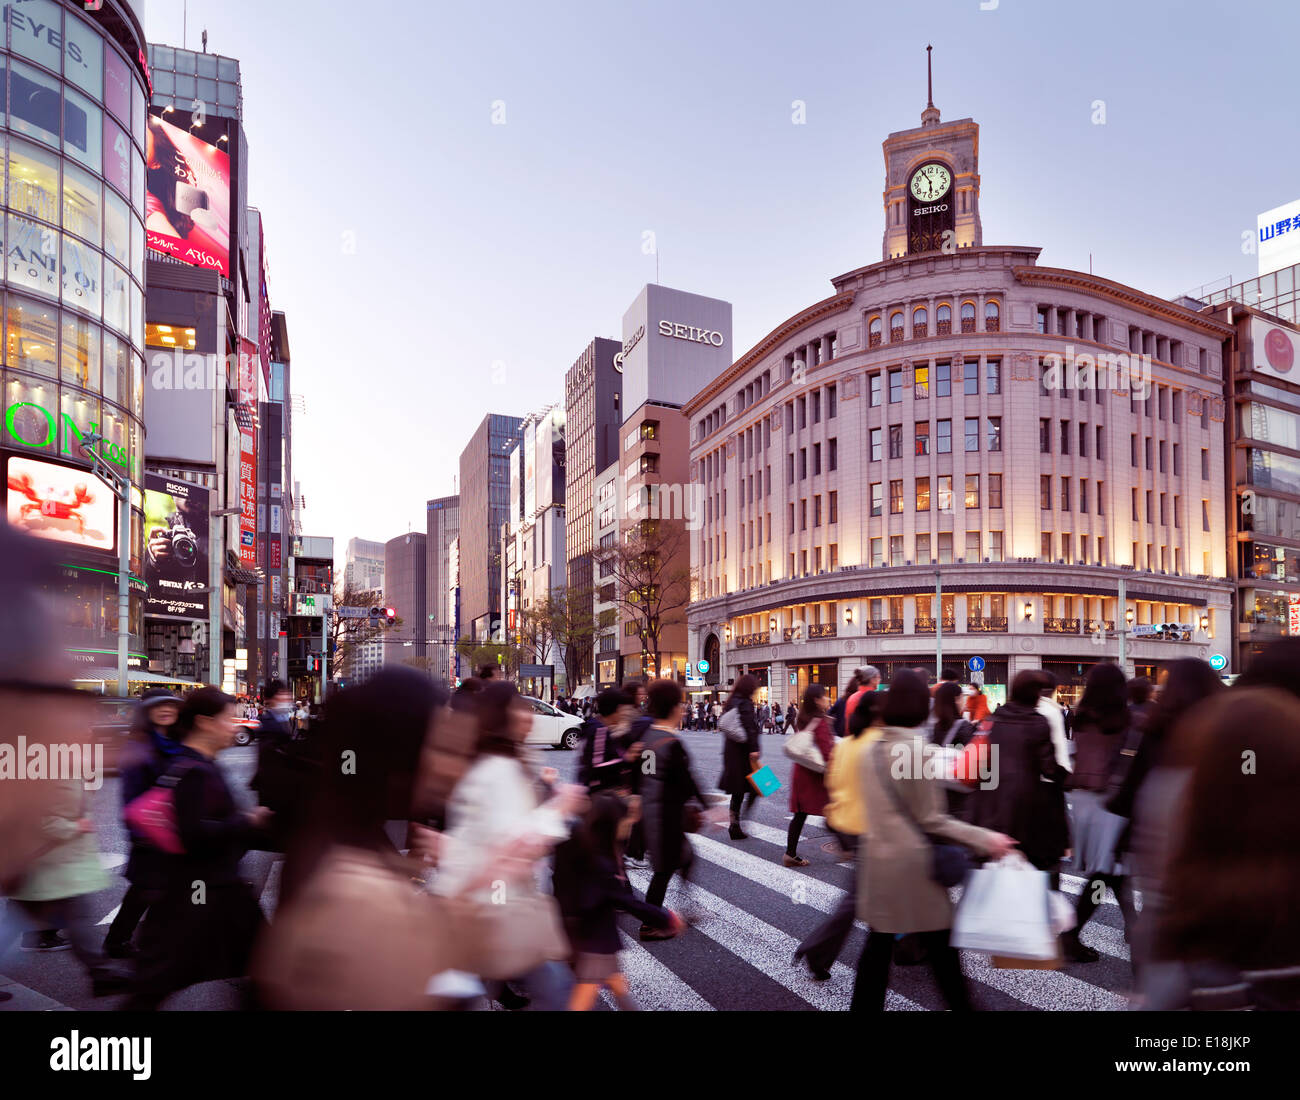 People crossing street in front of Wako Department Store building in Ginza, Tokyo, Japan 2014. Stock Photo